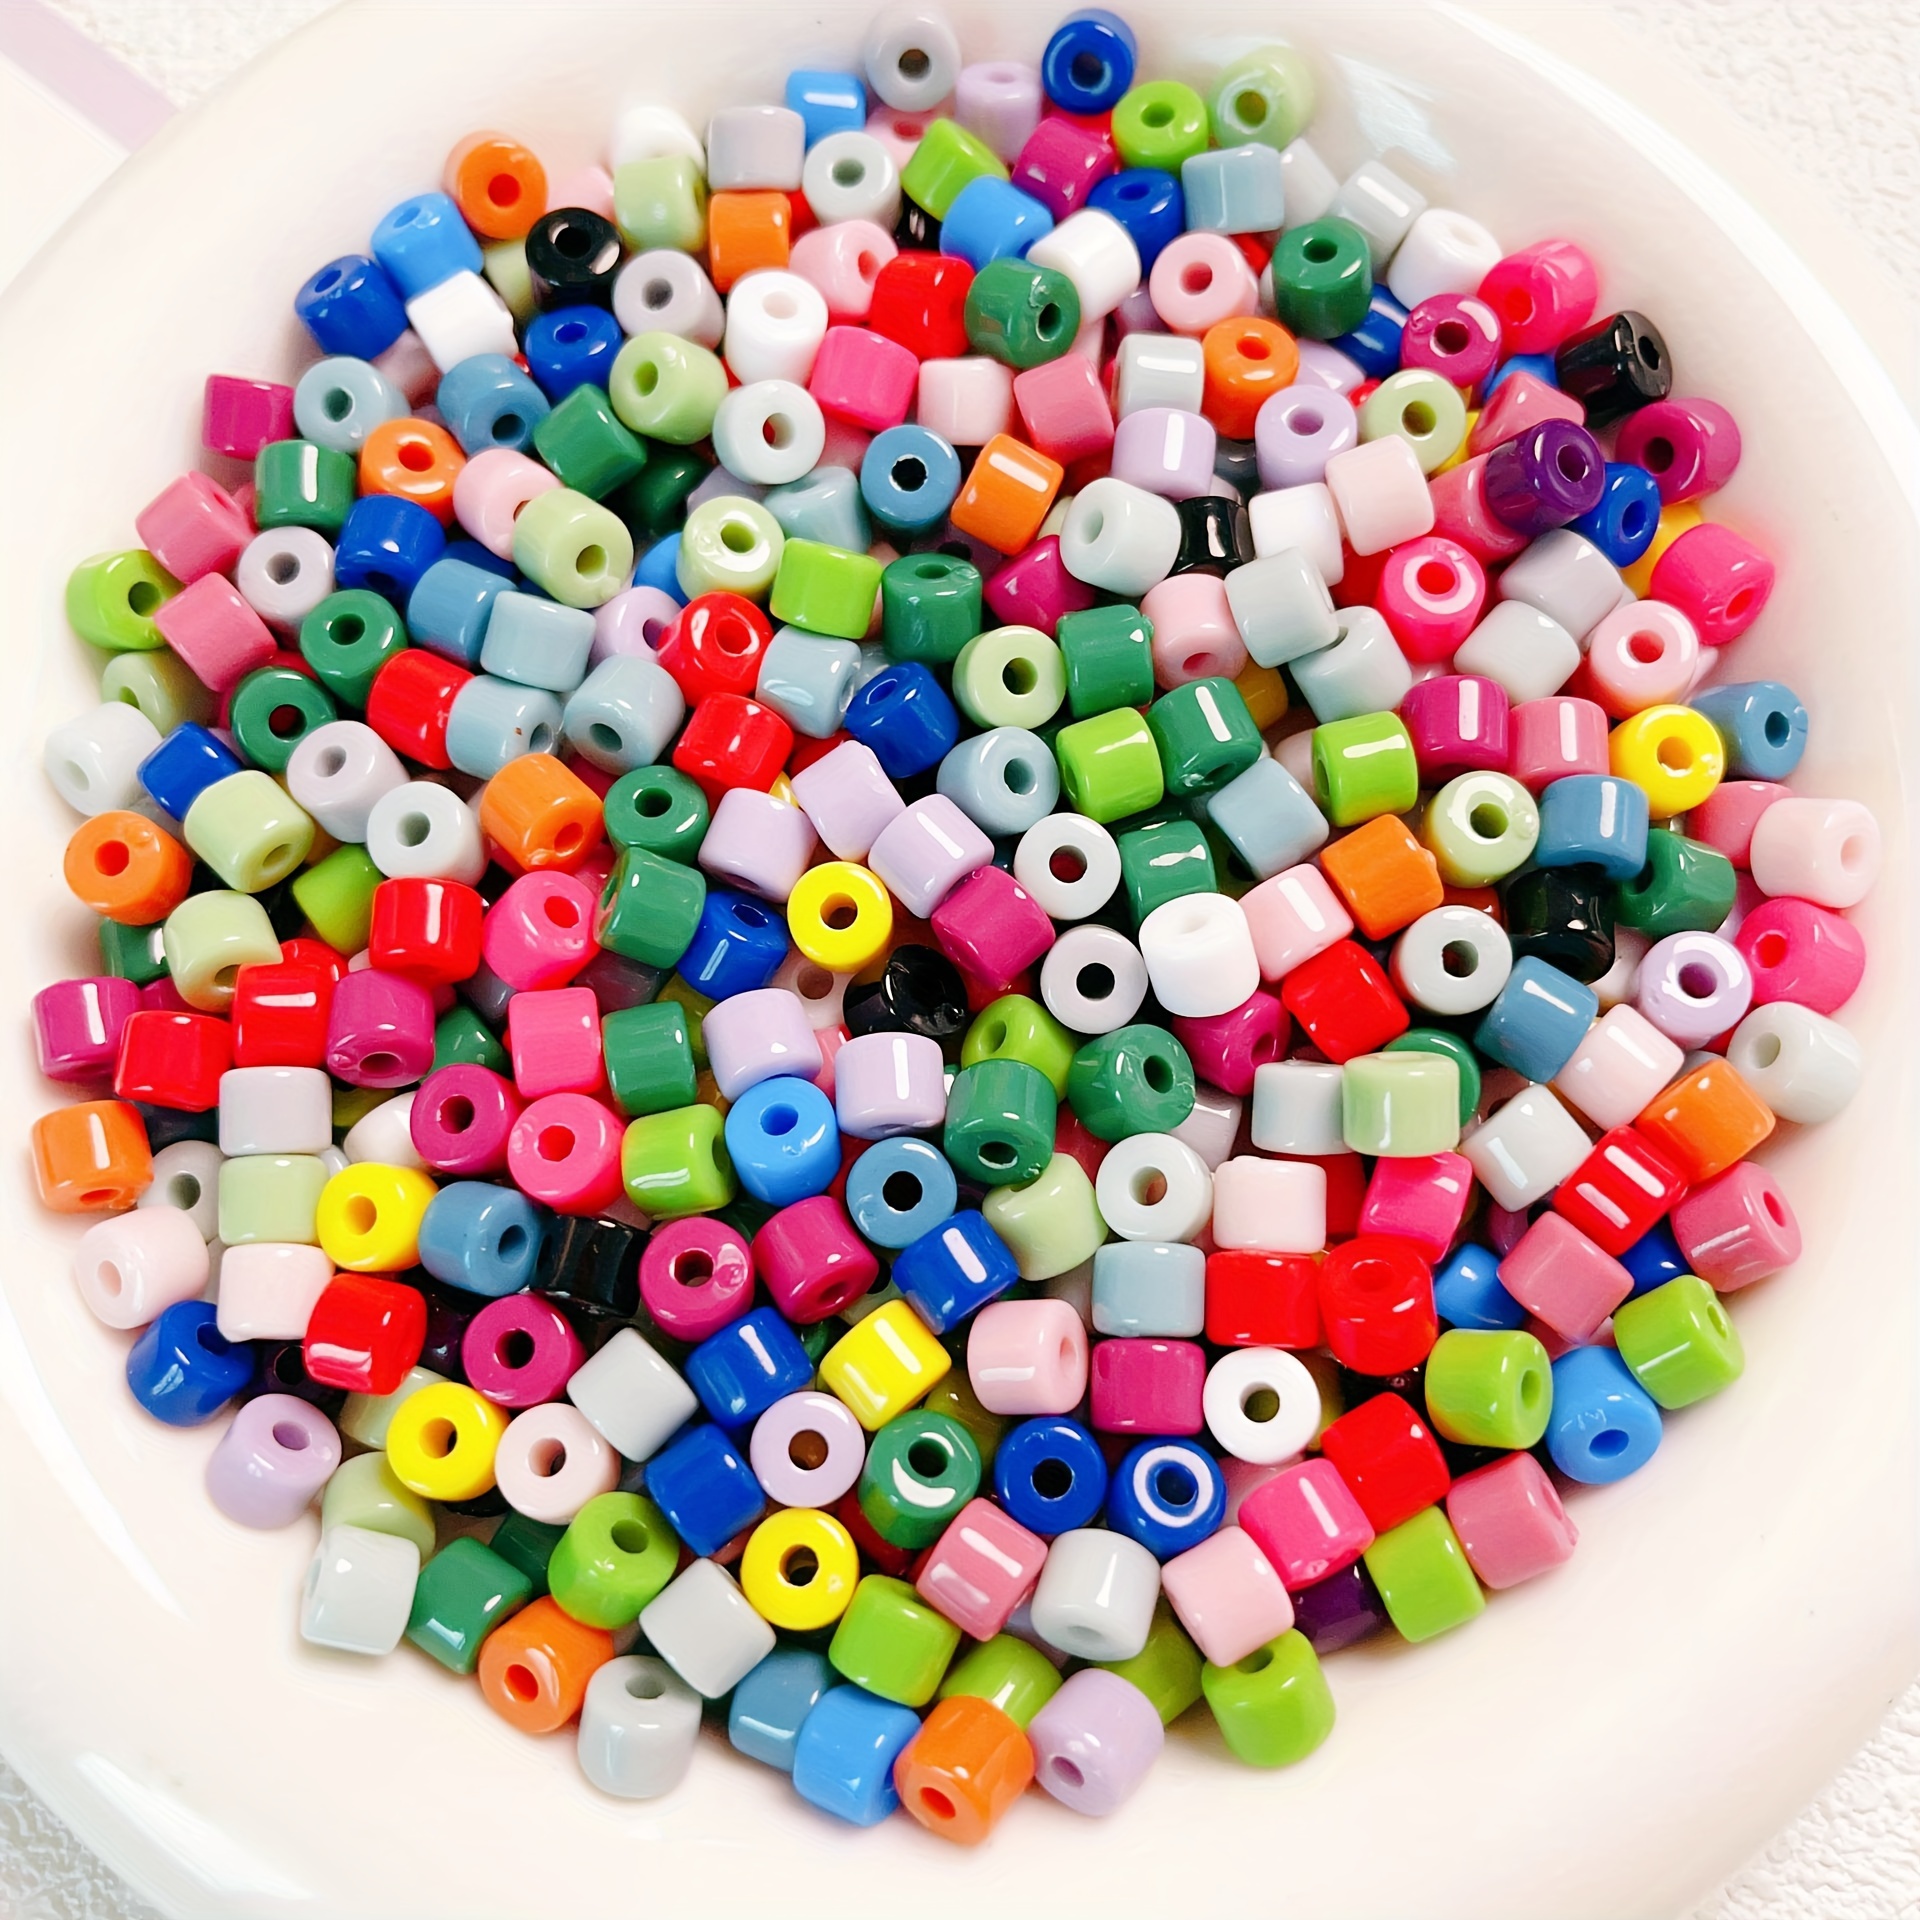 

100pcs Cylindrical 6mm Solid Color Barrel Beads For Jewelry Making Diy Fashion Bracelet Necklace Phone Chains Handmade Craft Supplies